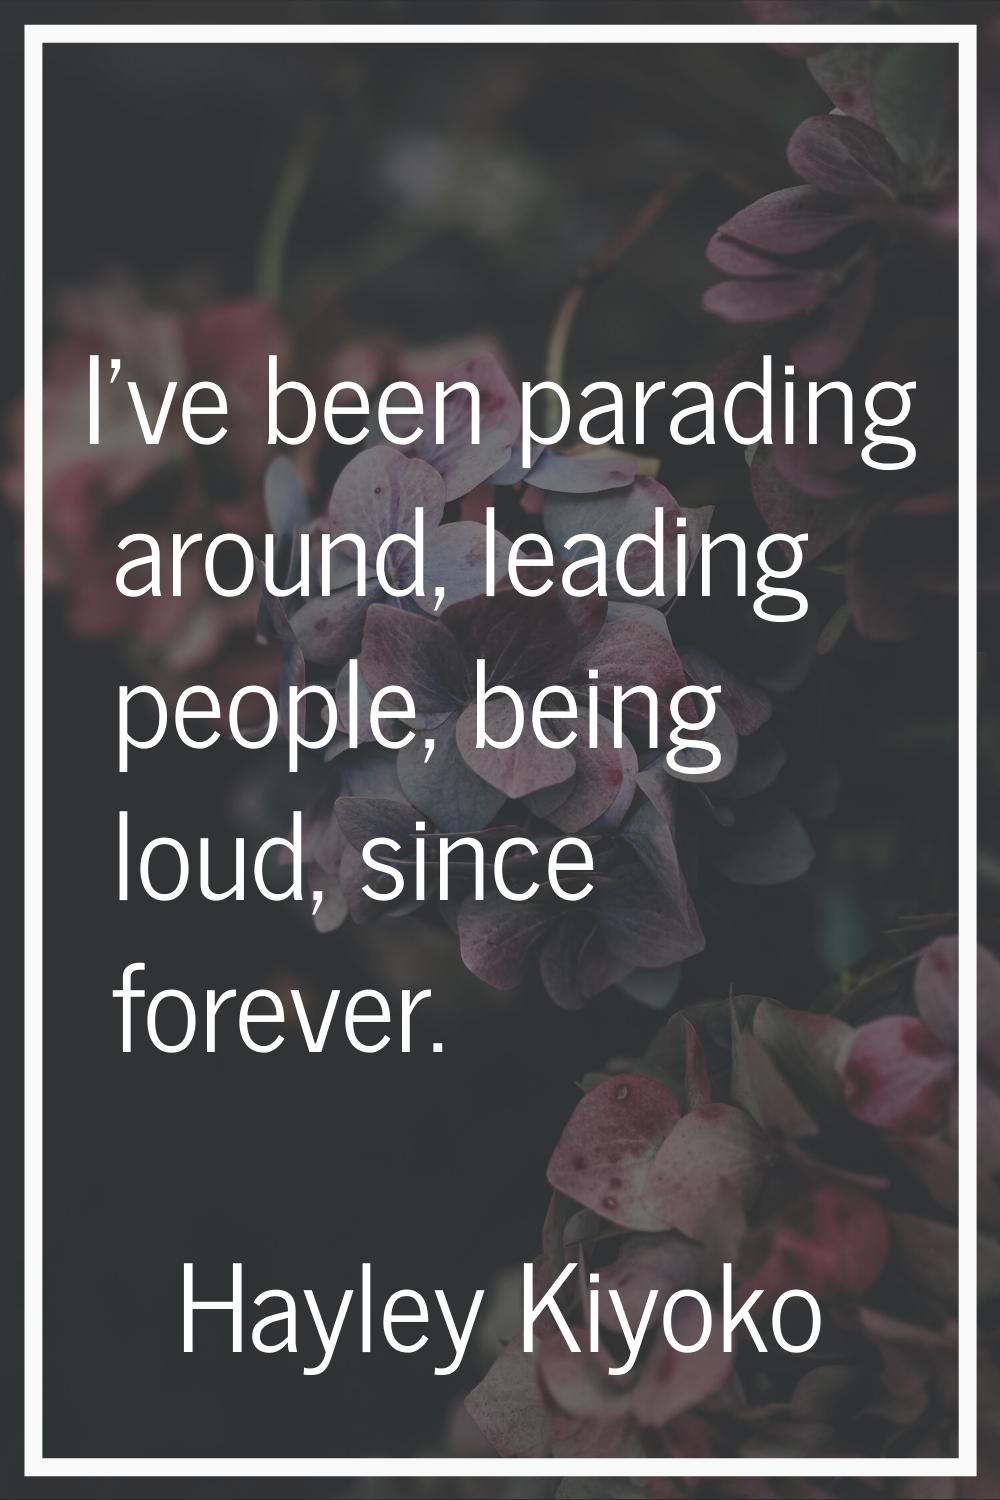 I've been parading around, leading people, being loud, since forever.